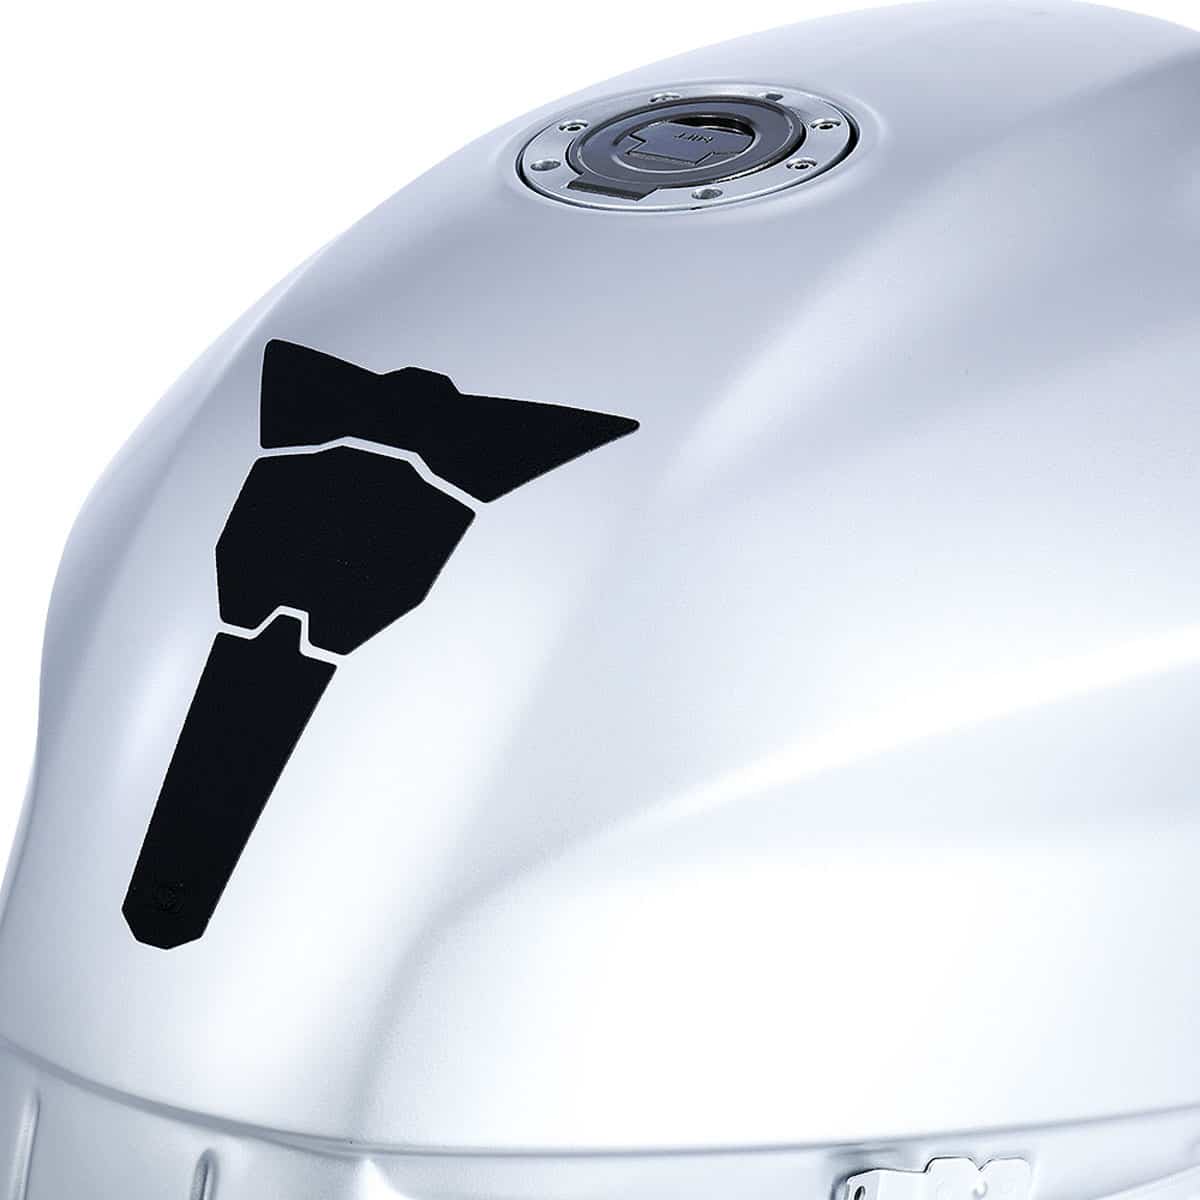 The Oxford Transformer Modular Tank Pad Spine is designed to protect your bike's paintwork from accidental bumps and rubbing.